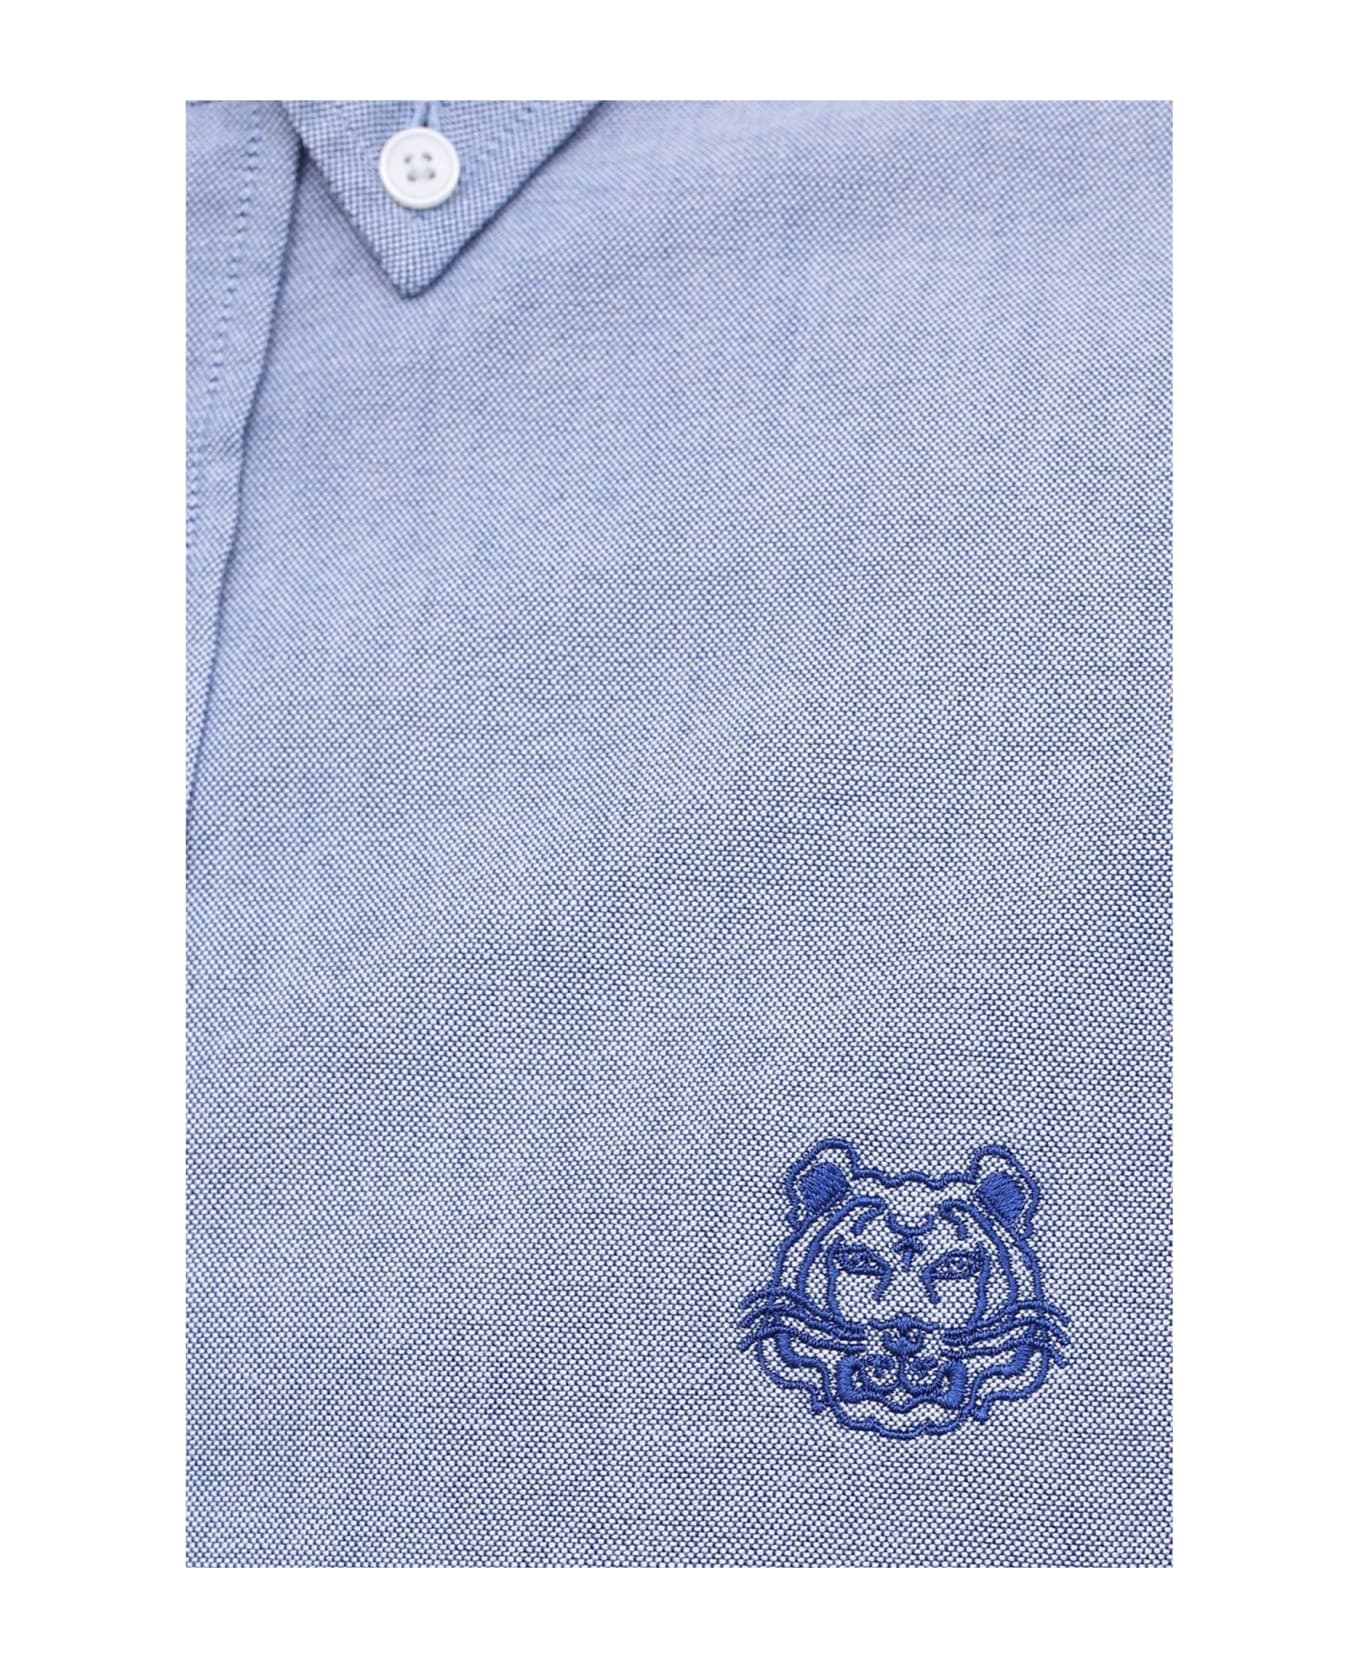 Kenzo Tiger Embroidered Shirt - Blue シャツ